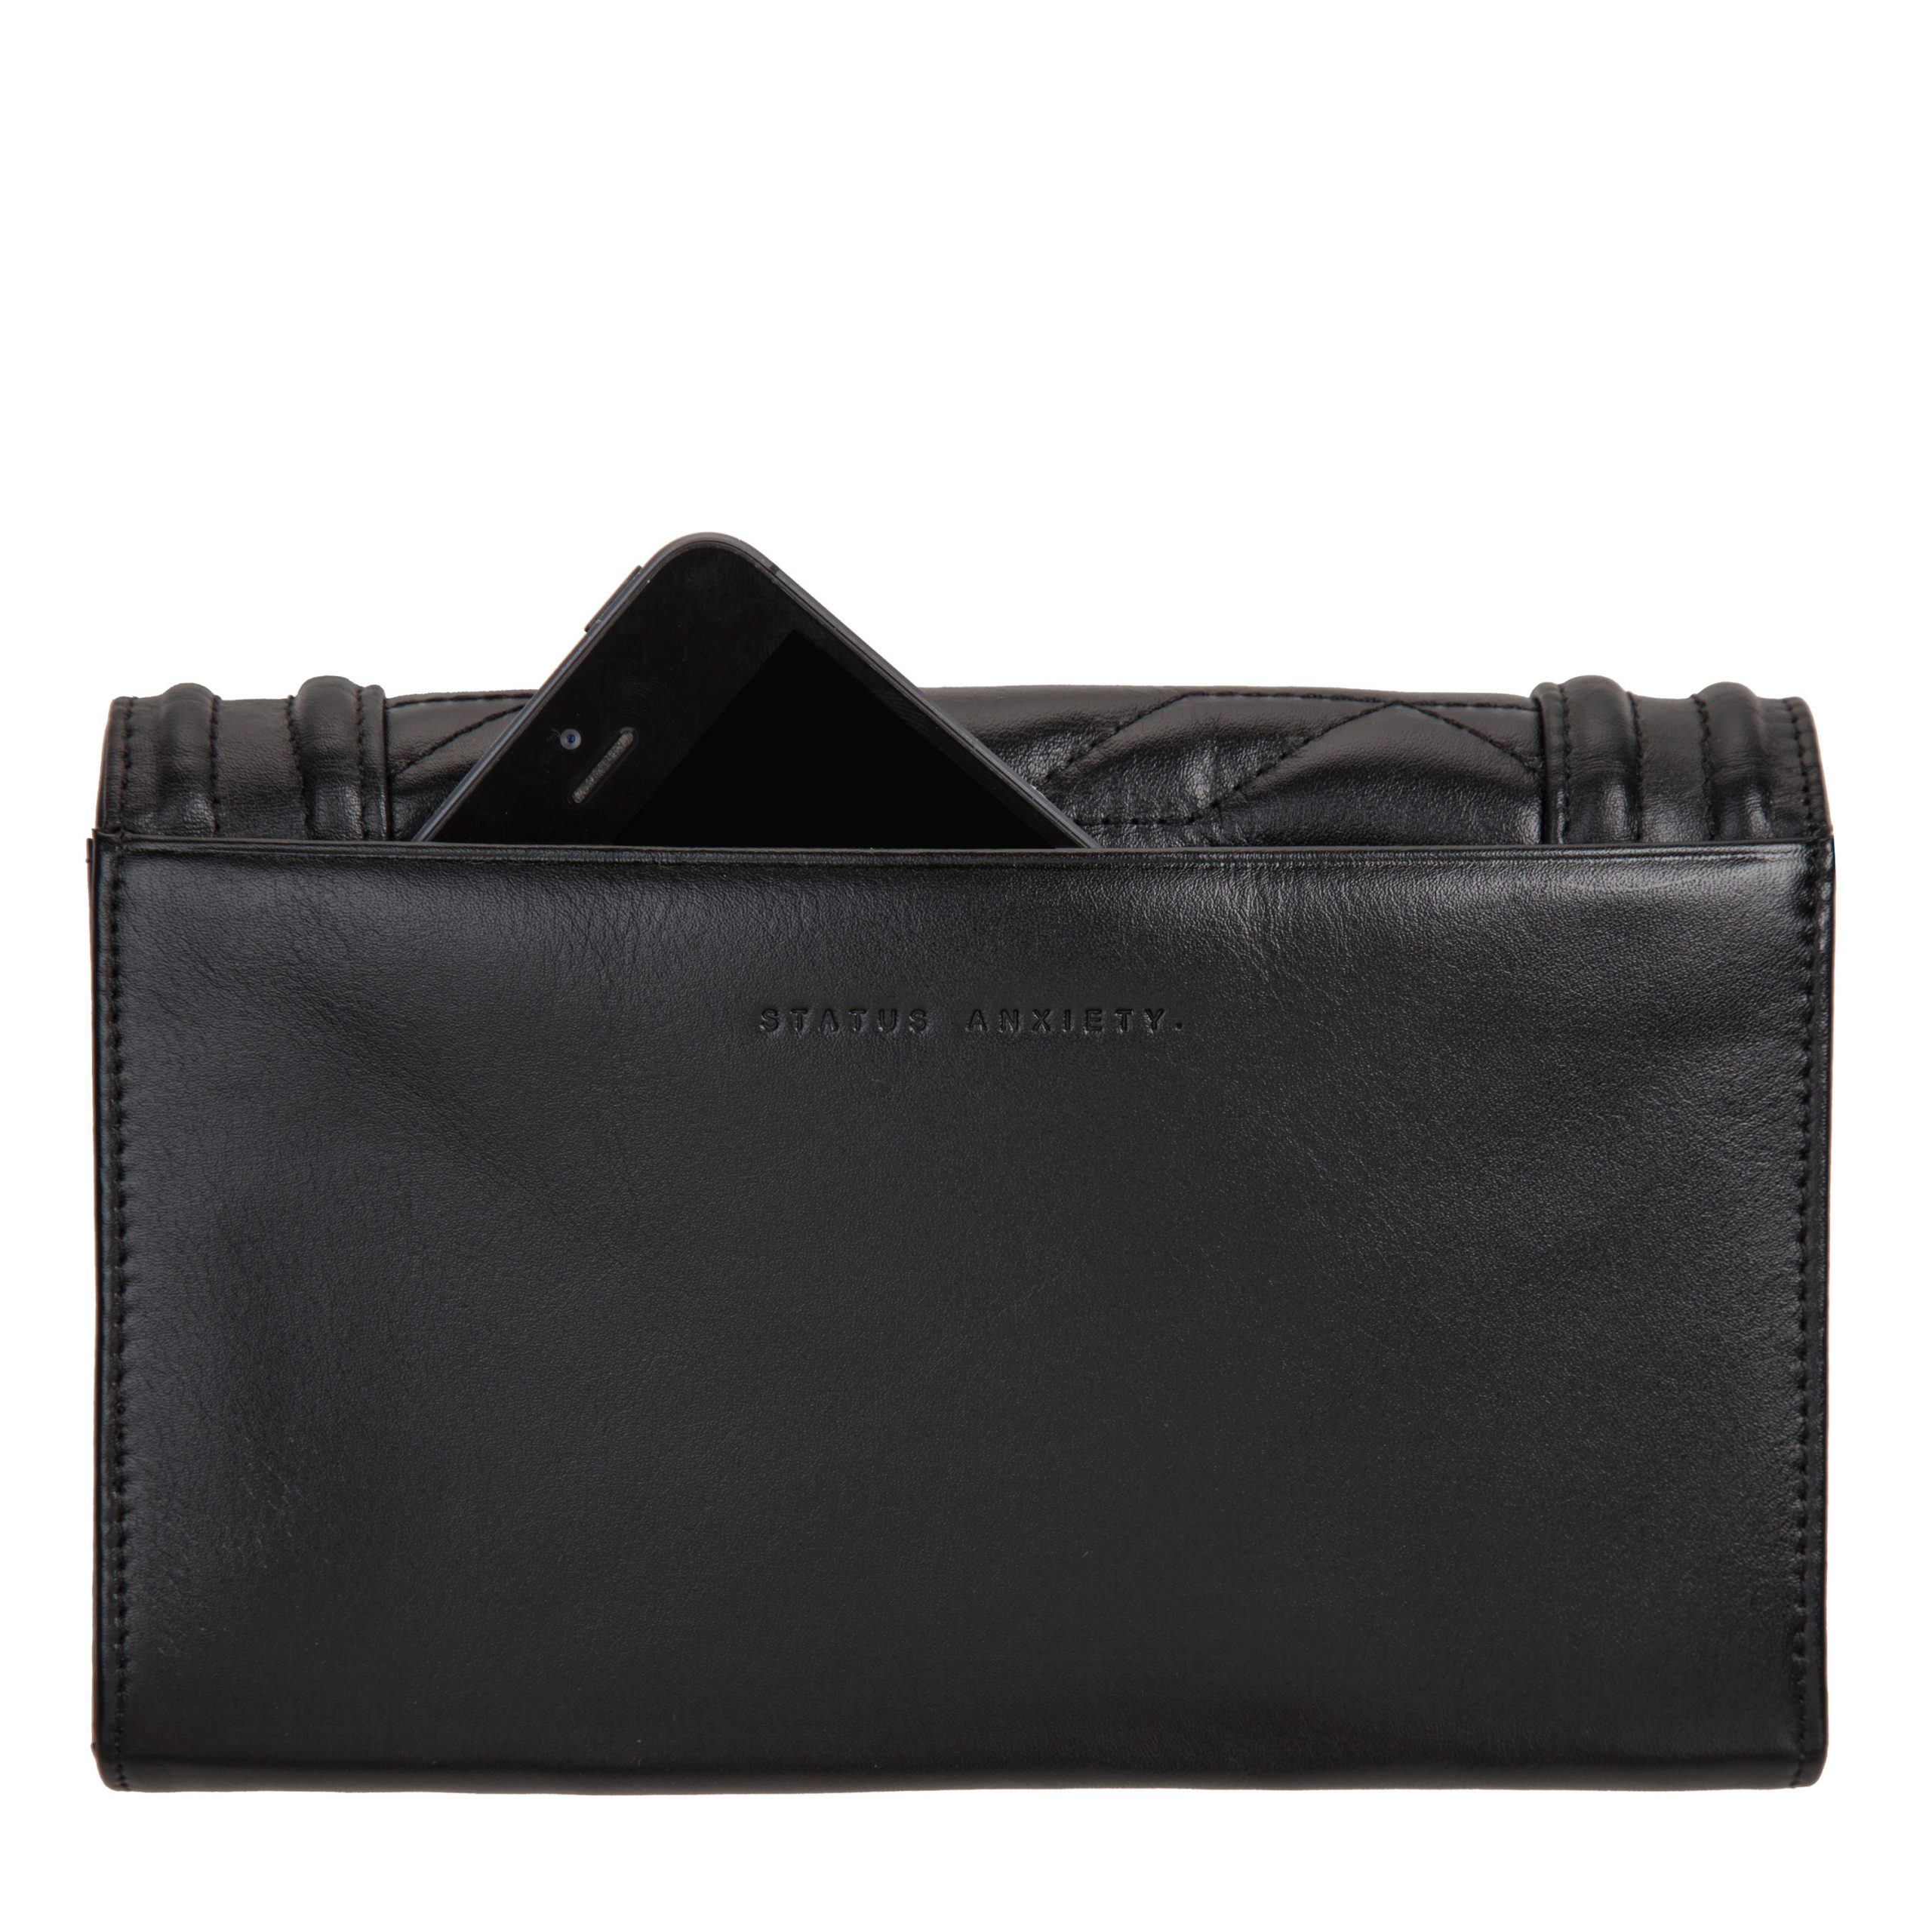 Status Anxiety Black Subversive Clutch - LUXAH Gifts and Homewares